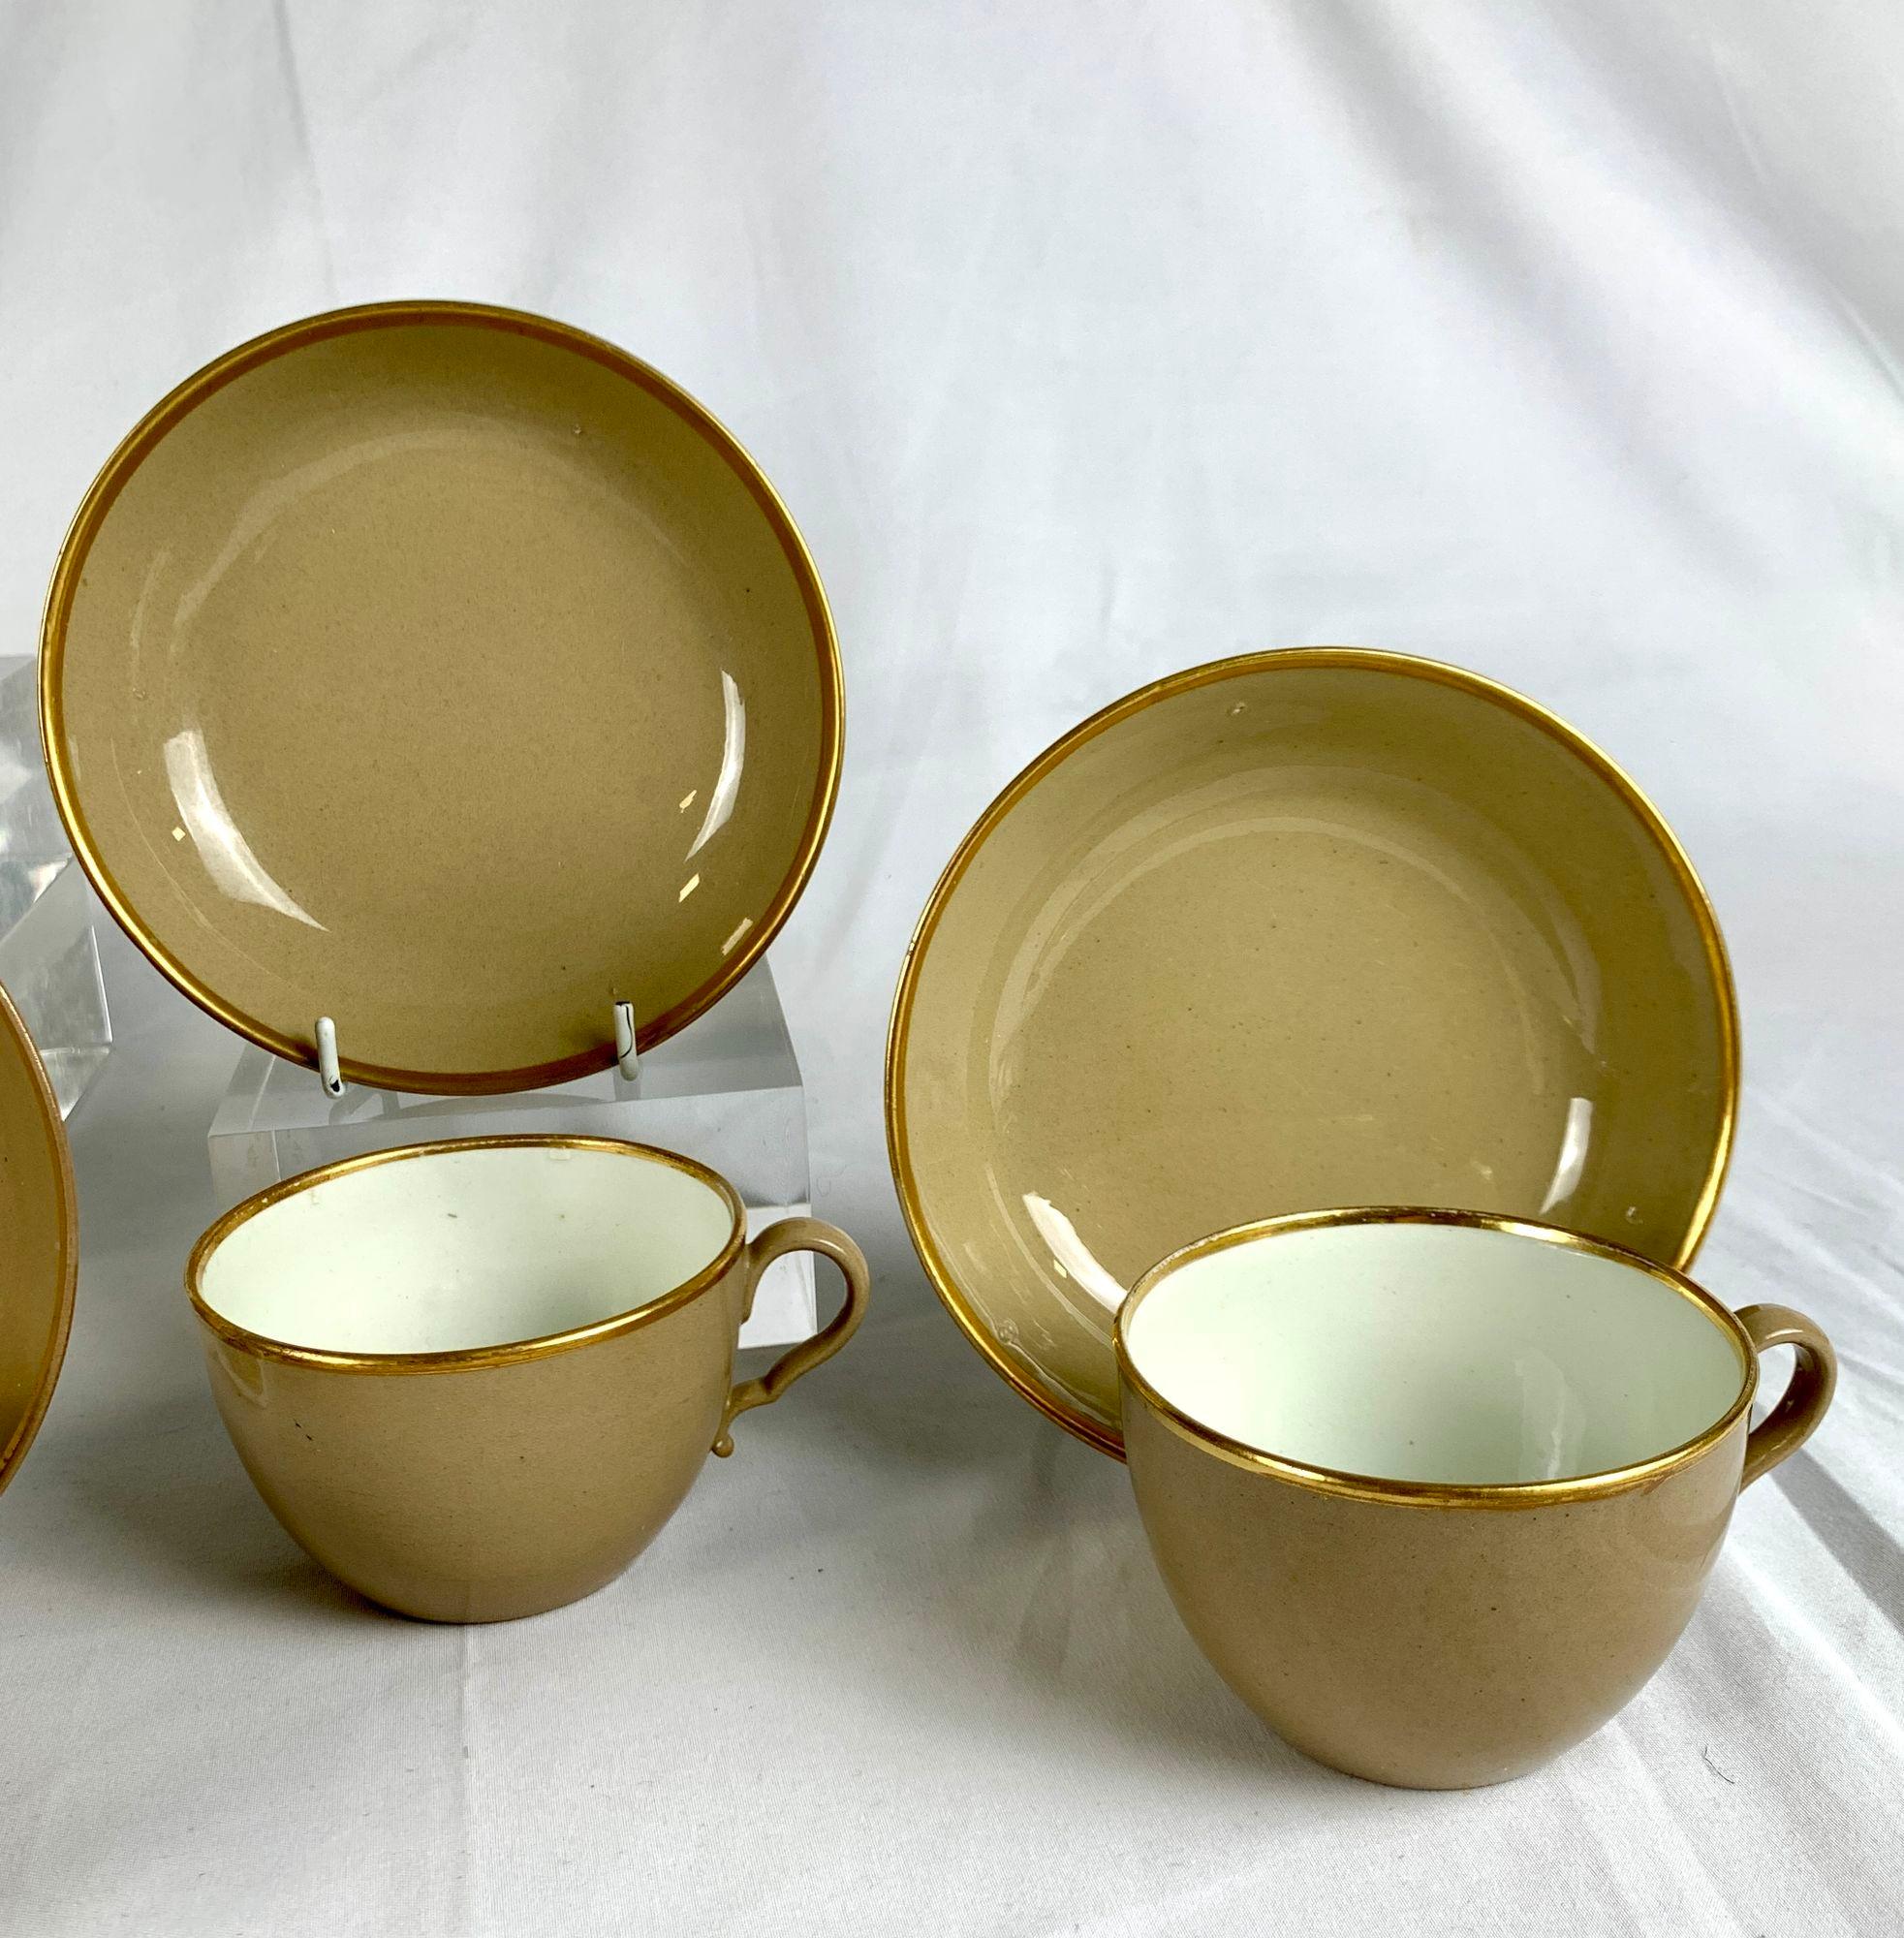 Antique Drabware Group of Cups and Saucers England Circa 1825 In Excellent Condition For Sale In Katonah, NY